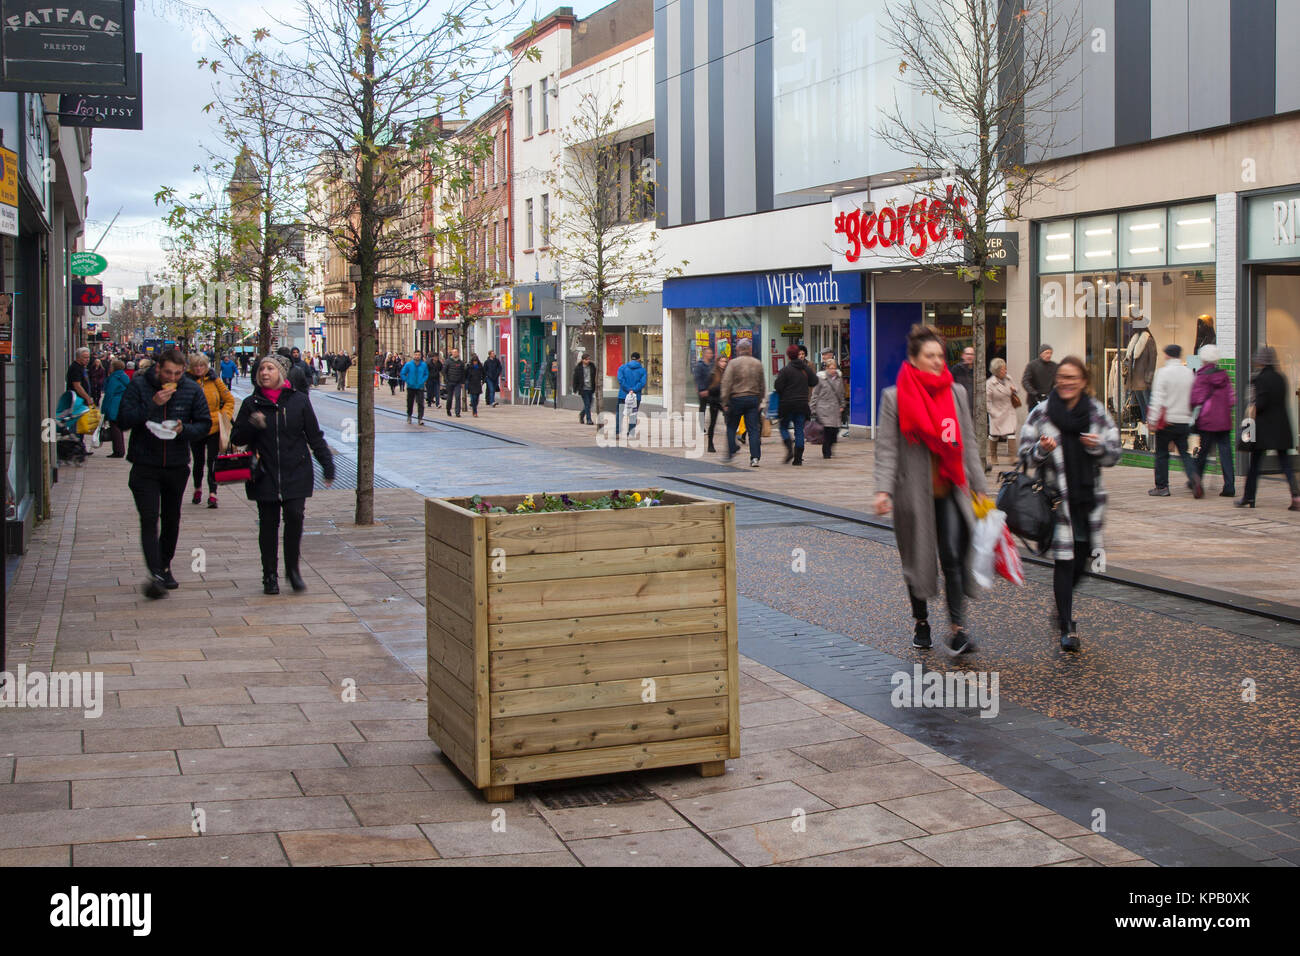 Preston, Lancashire, UK. 15th Dec, 2017. Security Alert. Anti-Terrorist devices, or vehicle buffers have been installed overnight in the cities High Street. Shoppers in Fishergate have now to negotiate around large wooden planters filled with concrete & topped off with winter pansies. The devices designed to thwart a vehicle led attack targeting Christmas shoppers & pedestrians have been greeted with some amusement by residents, variously described as the largest litter bins on the street, an eyesore and a huge obstruction for the visually impaired. Credit: MediaWorldImages/Alamy Live News Stock Photo